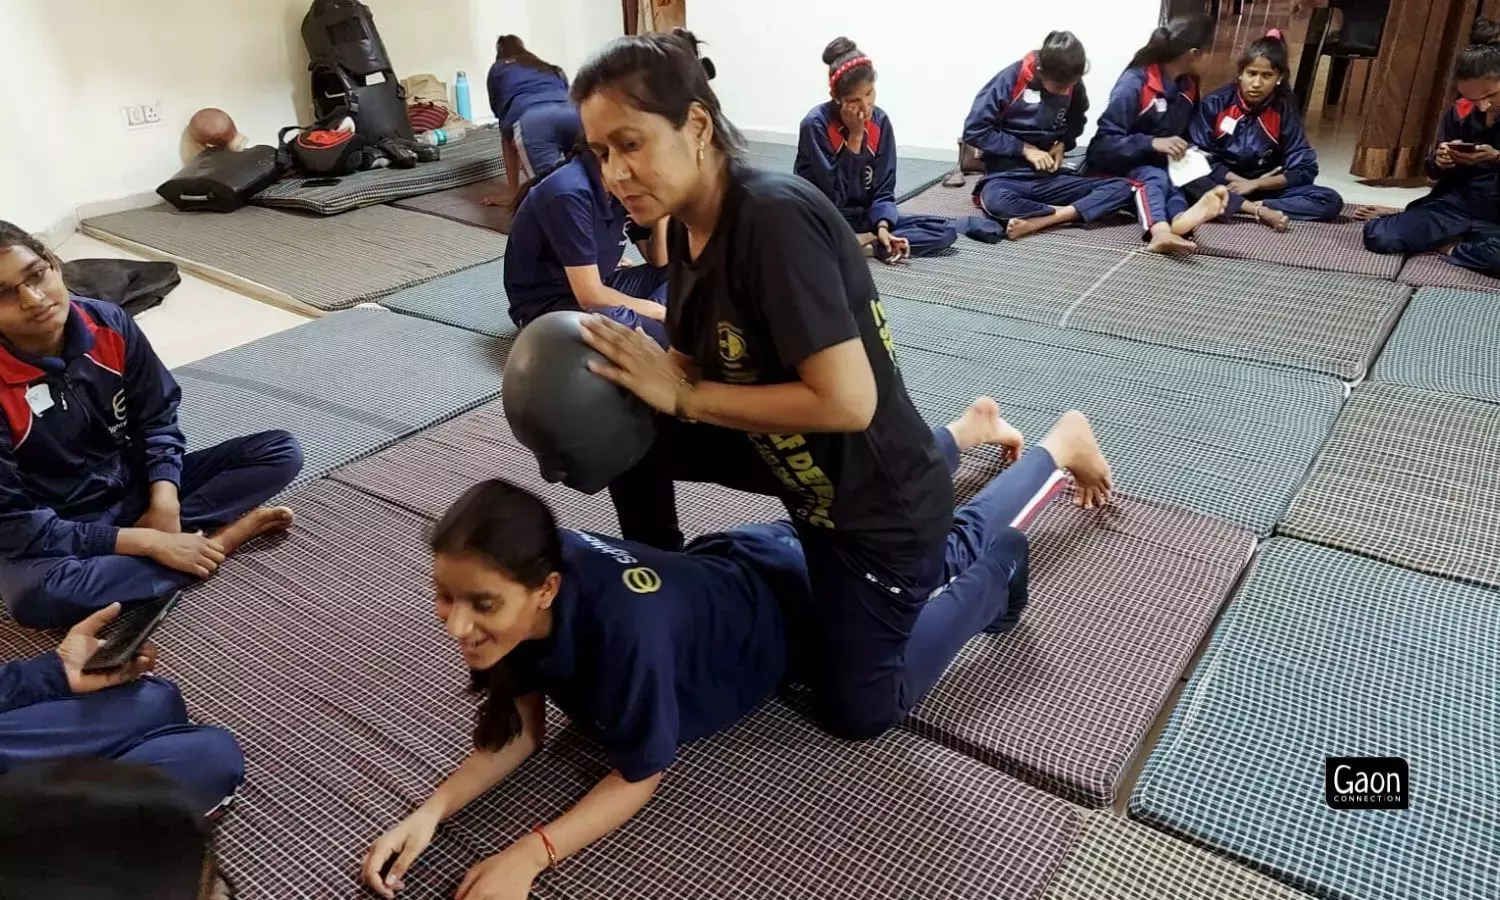 Mission Shakti 4.0 set to launch in Uttar Pradesh to train rural girls in self-defence